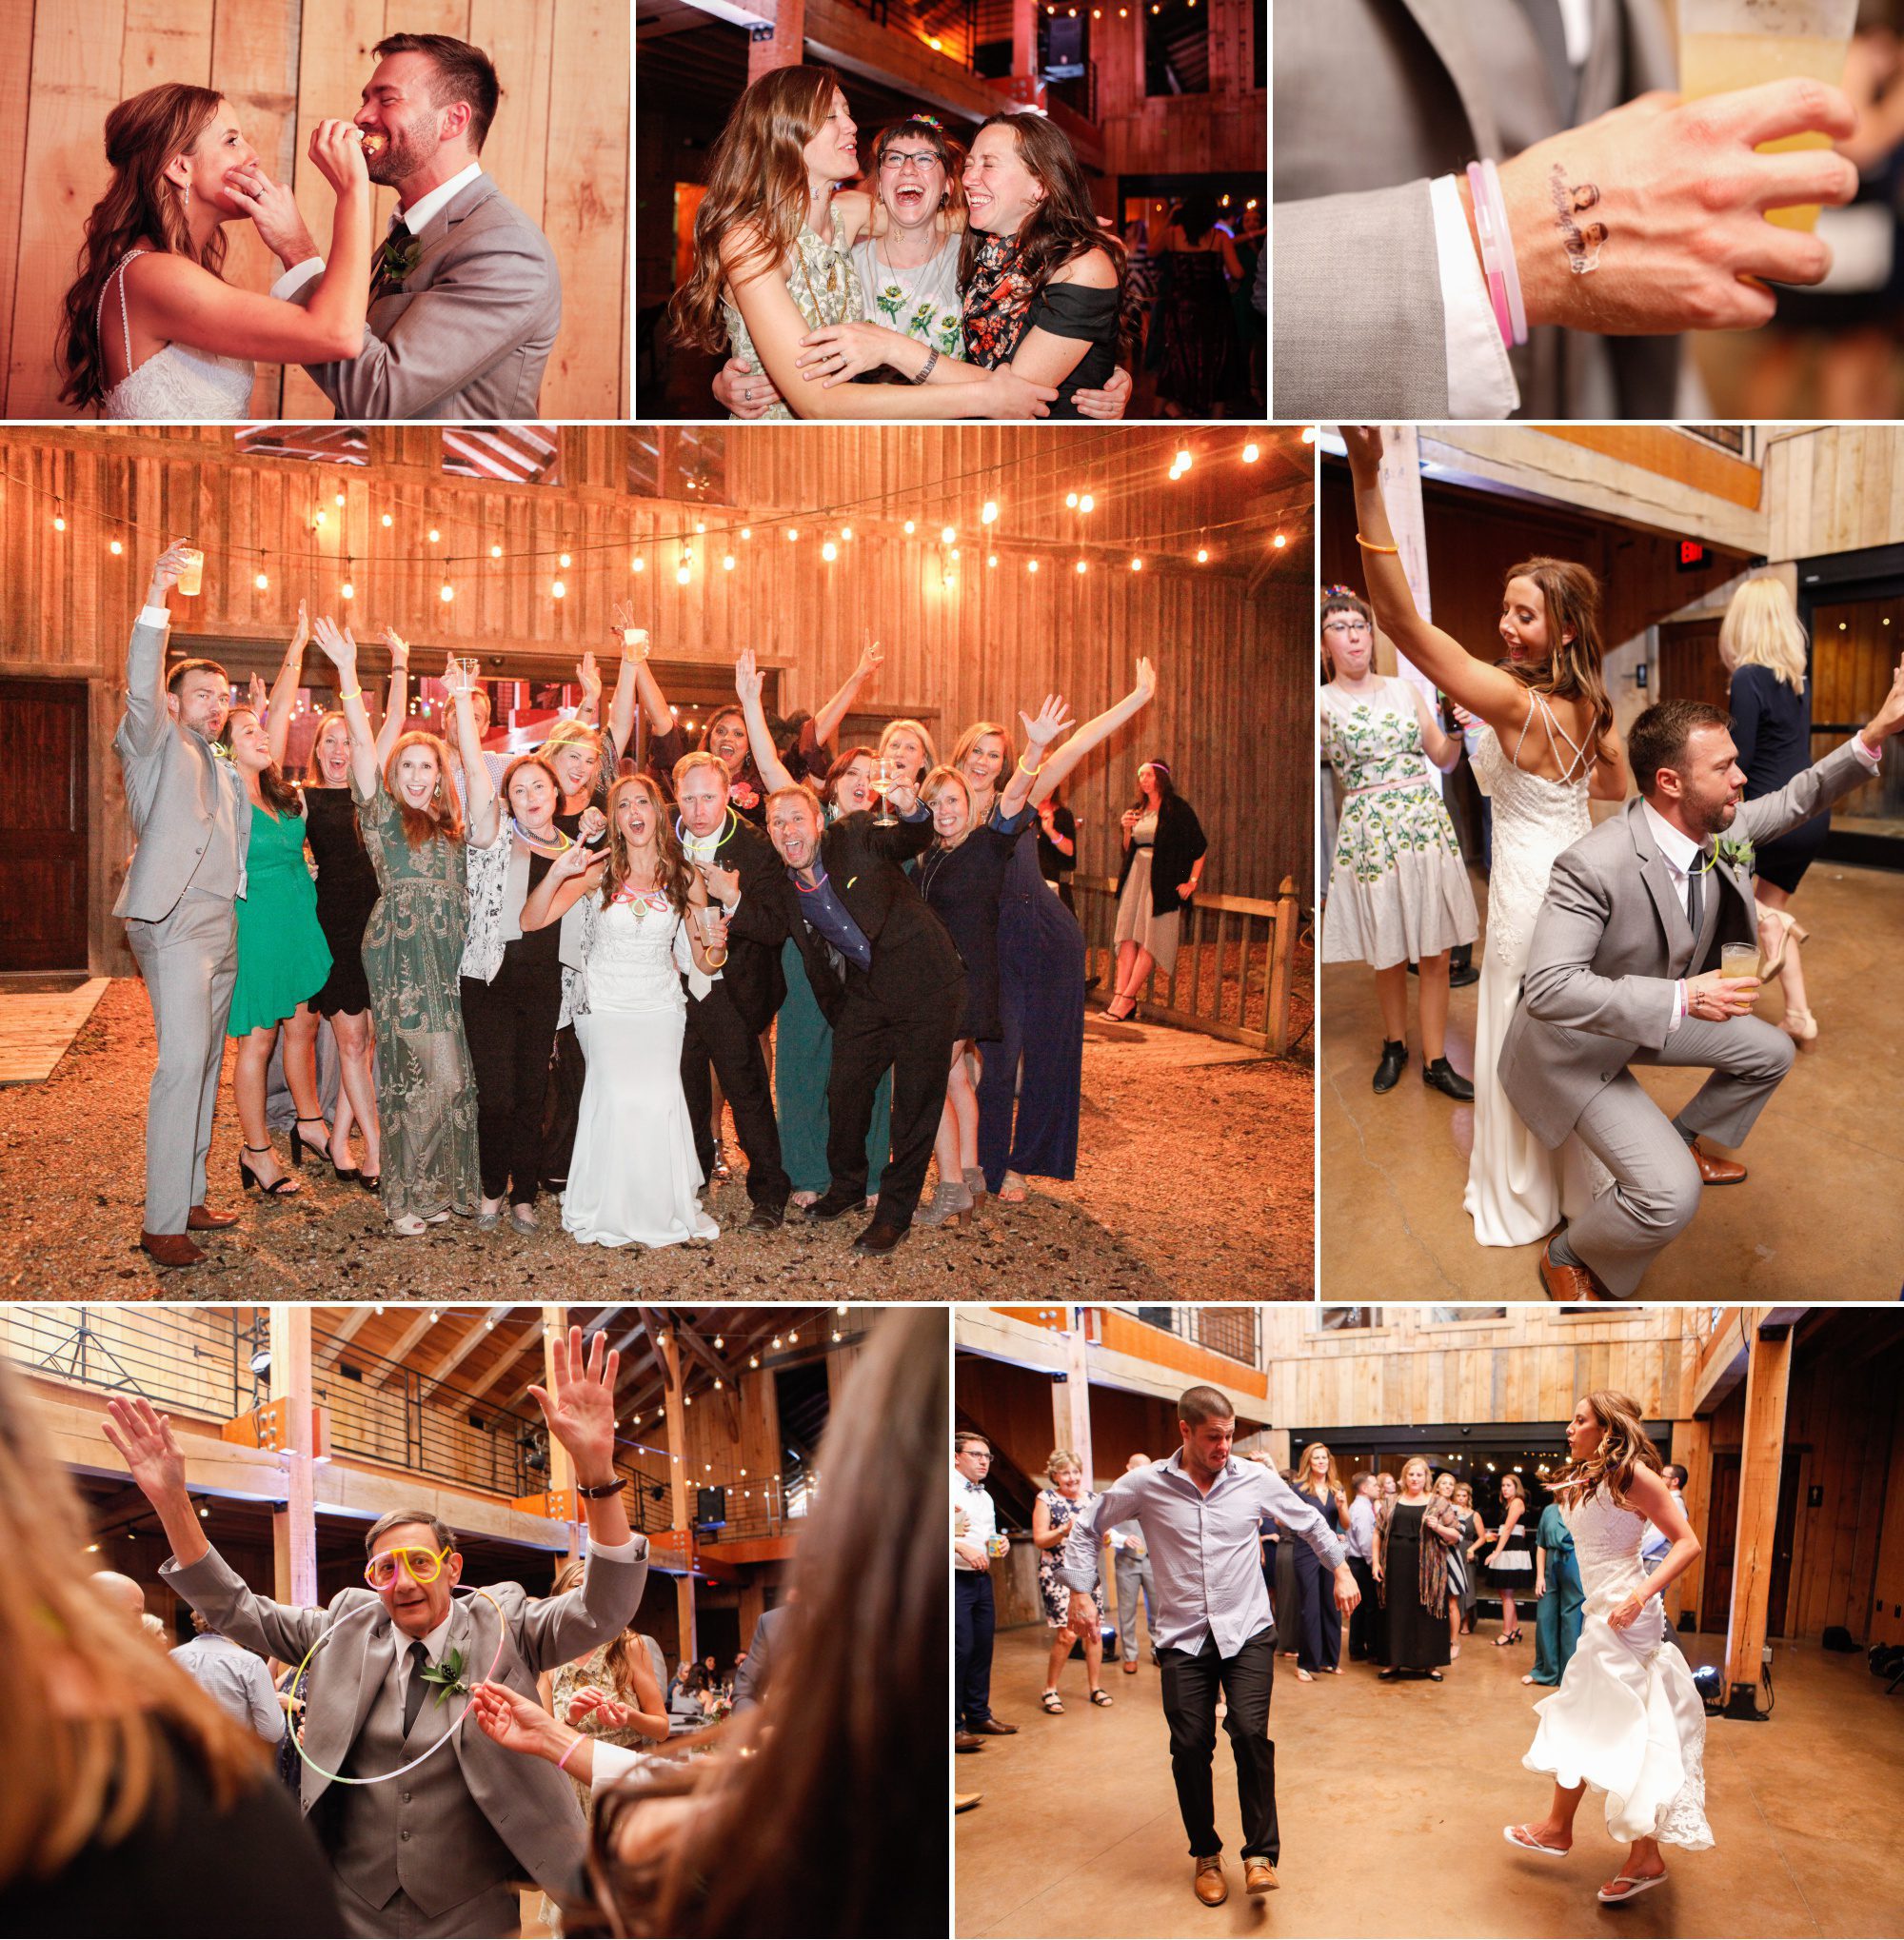 Guests at reception in grand barn and dancing after wedding ceremony at Green Door Gourmet wedding in Nashville, TN